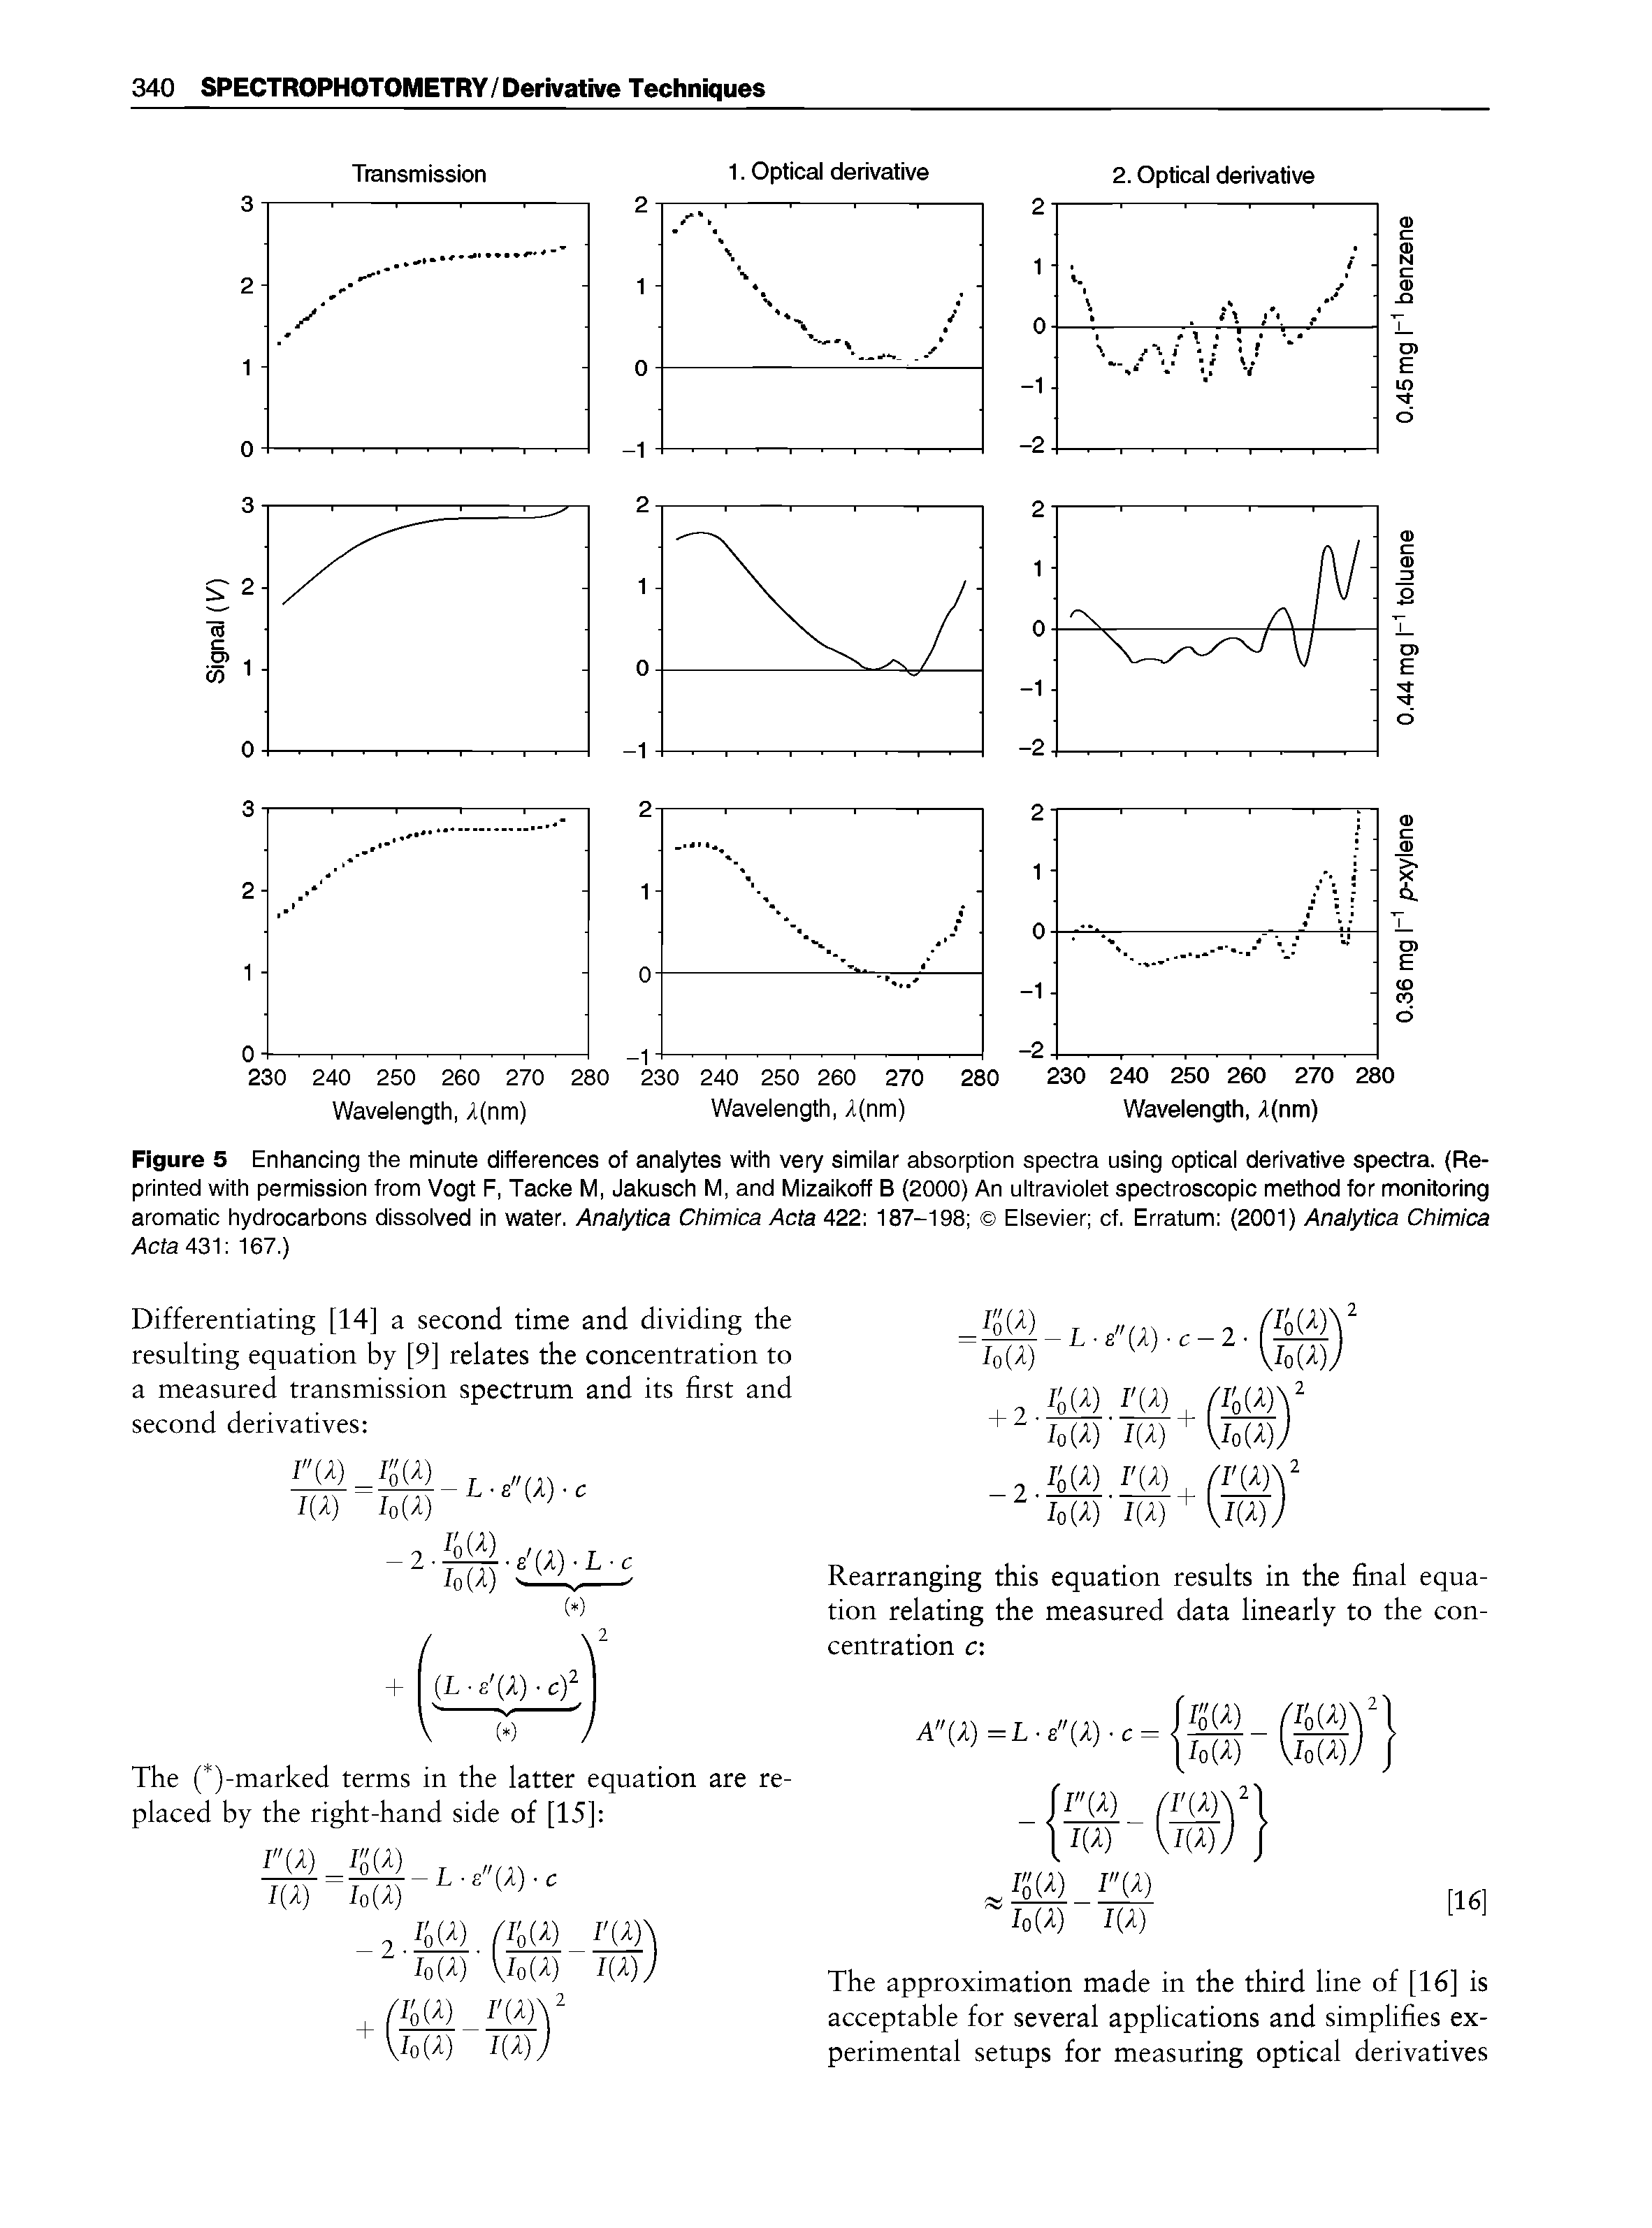 Figure 5 Enhancing the minute differences of analytes with very similar absorption spectra using optical derivative spectra. (Reprinted with permission from Vogt F, Tacke M, Jakusch M, and Mizaikoff B (2000) An ultraviolet spectroscopic method for monitoring aromatic hydrocarbons dissolved in water. Analytica Chimica Acta 422 187-198 Elsevier cf. Erratum (2001) Analytica Chimica Acfa431 167.)...